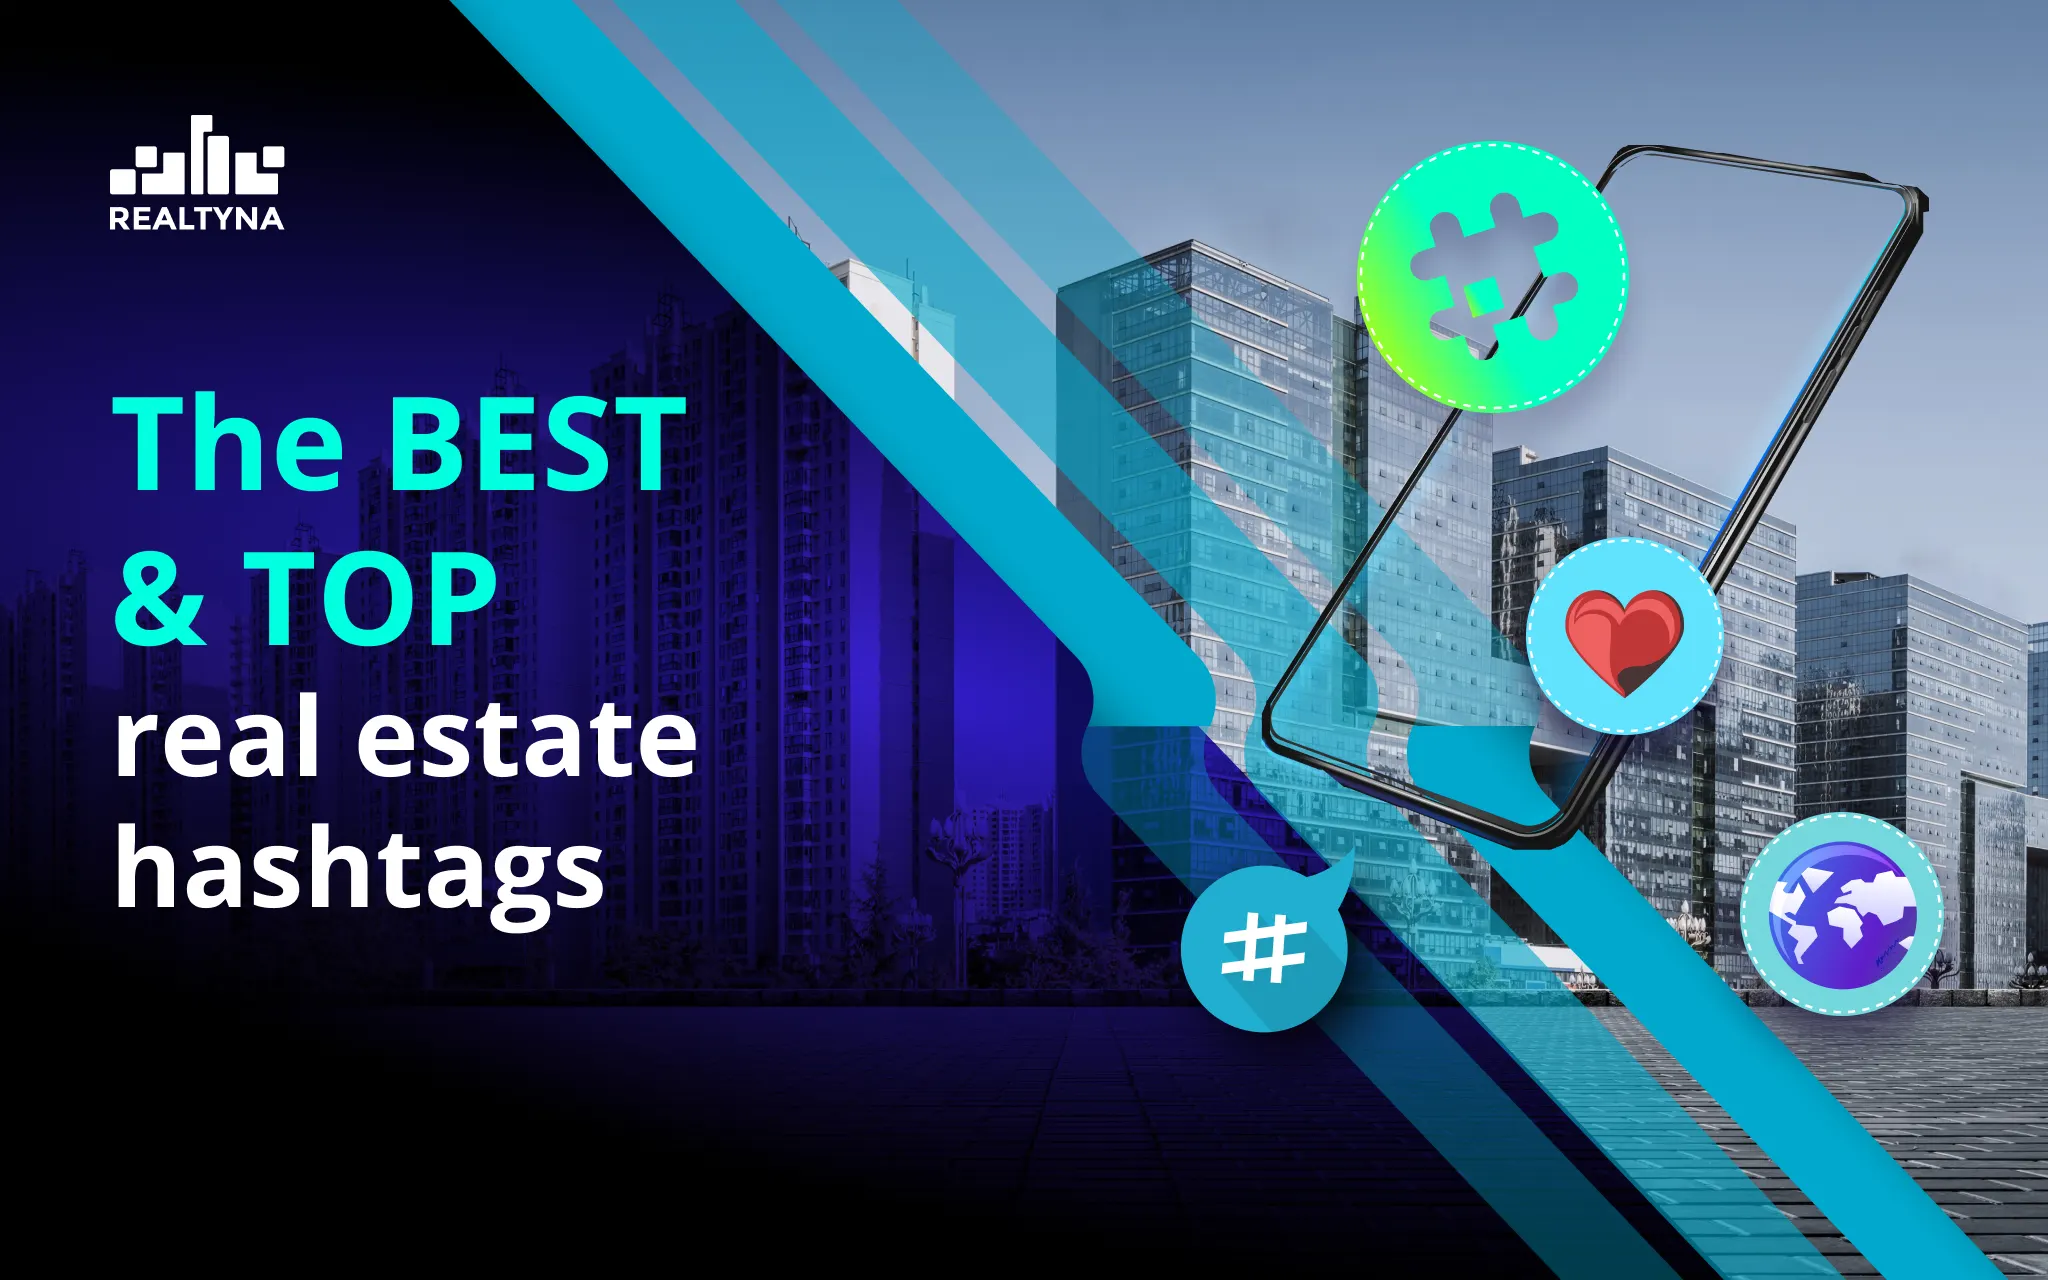 The BEST & TOP real estate hashtags